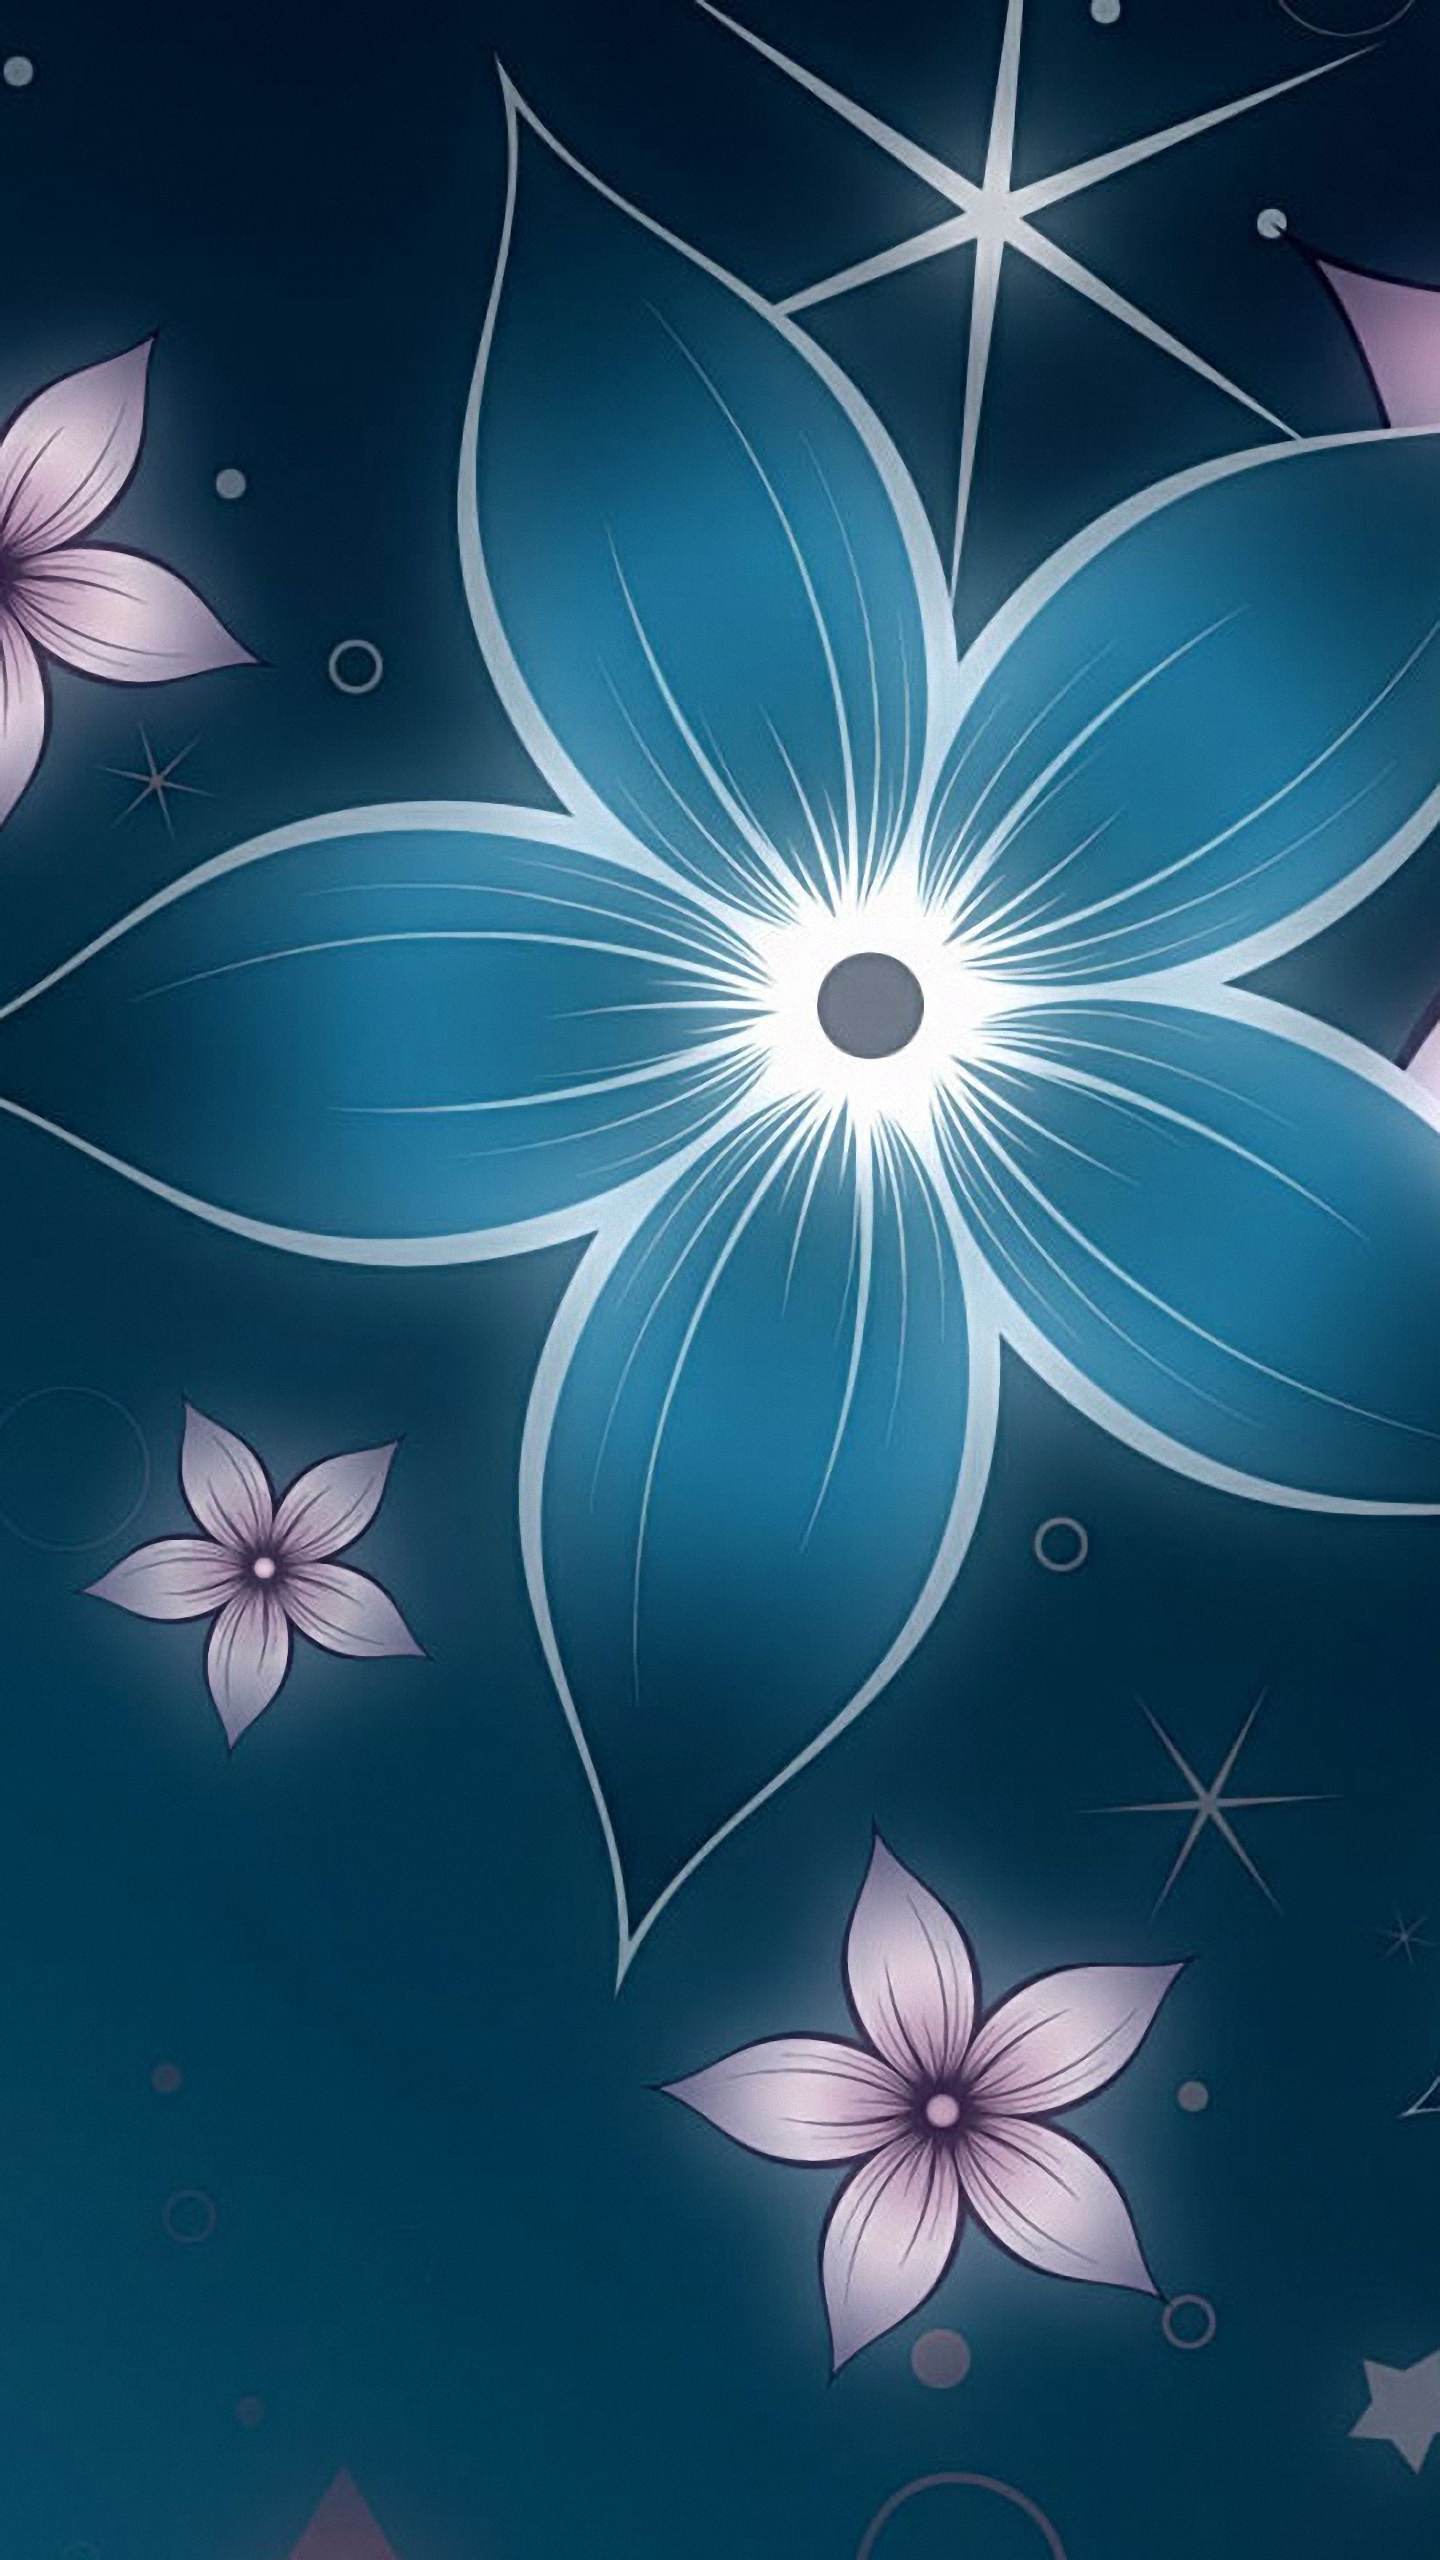 Hd Glowing Flowers Sony Xperia Z4 Wallpapers Display Wallpapers For Pc 1440x2560 Wallpaper Teahub Io